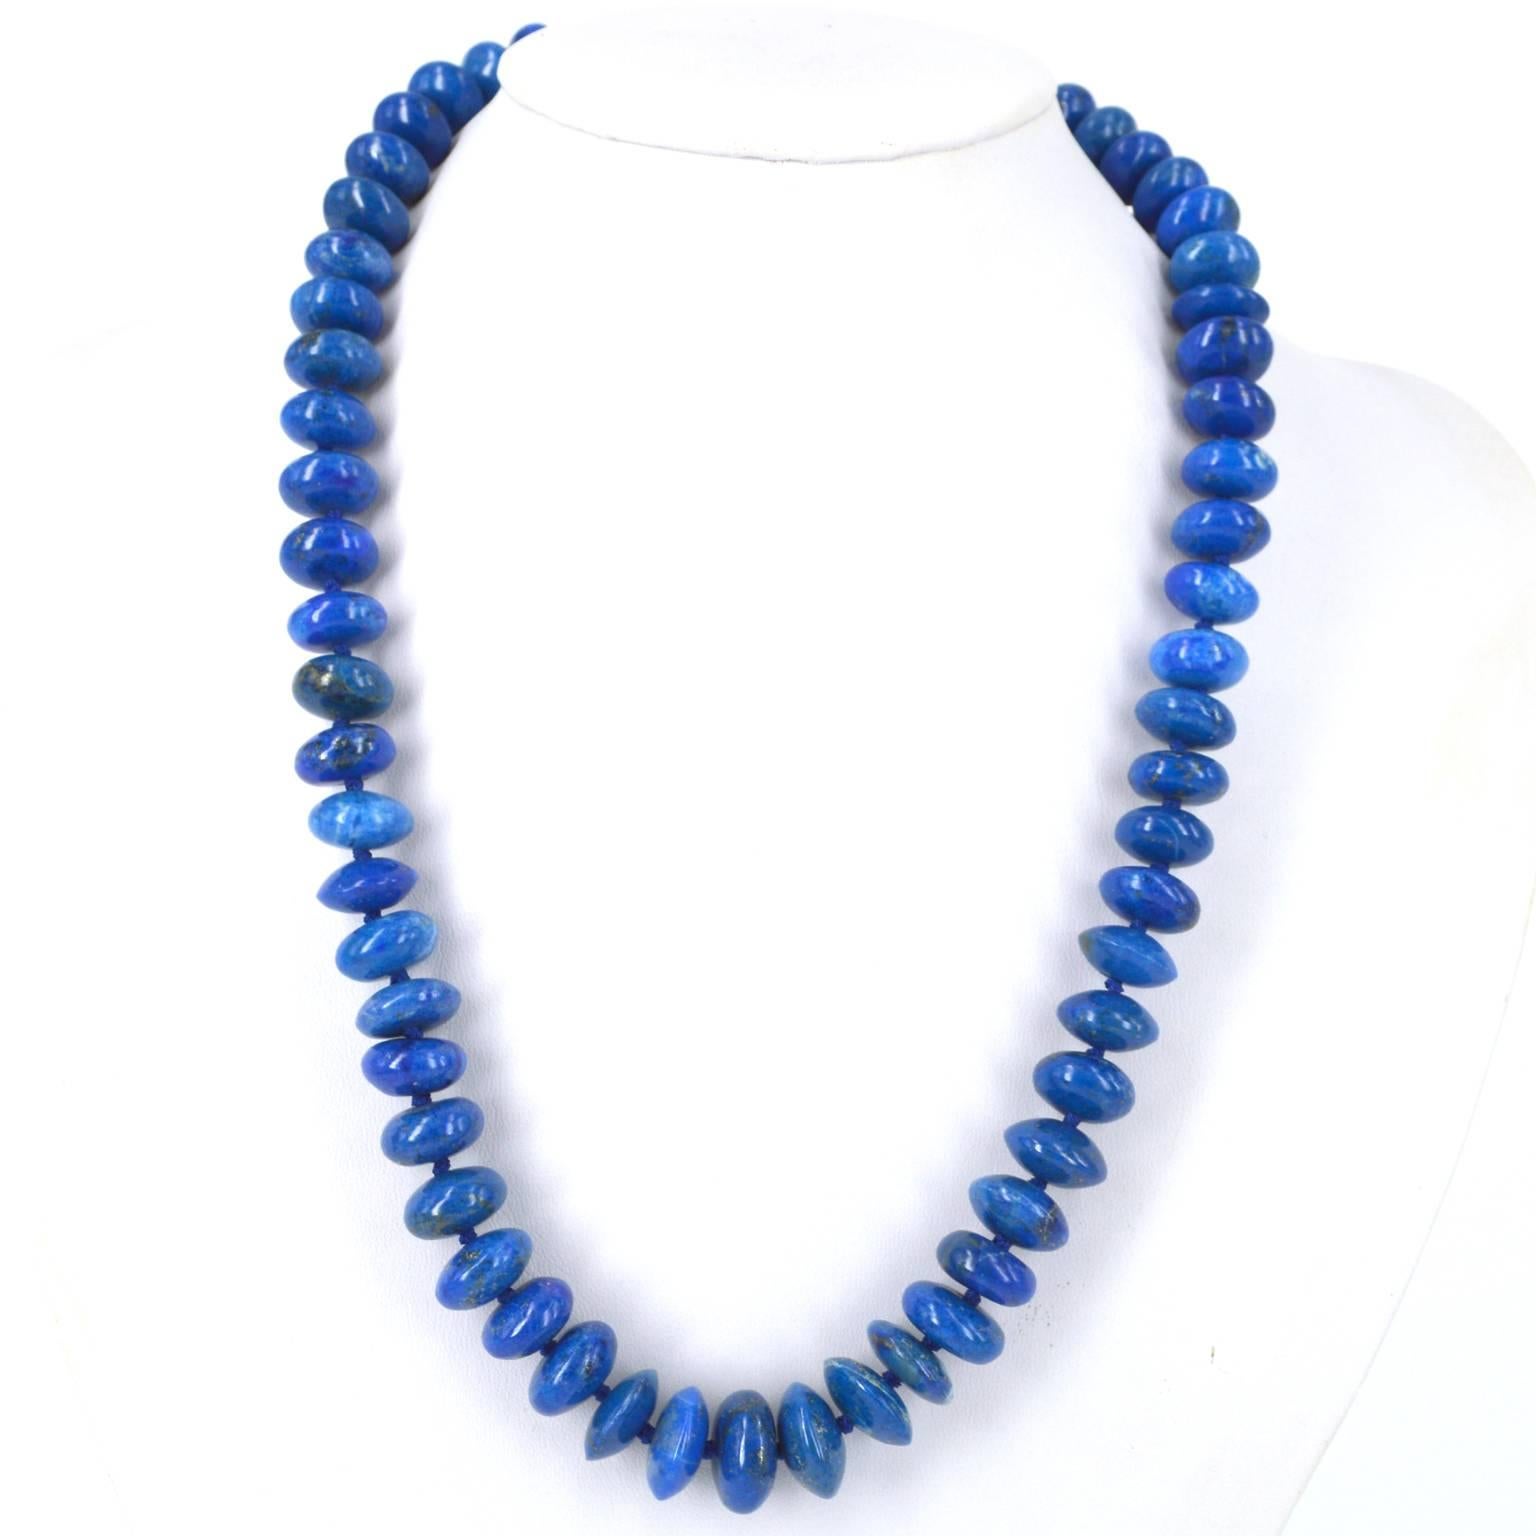 Natural Lapis Lazuli polished roundels graduating 11x7mm up to 15x7.5mm hand knotted with complimentary coloured thread and a 13.5mm Gold Plate Sterling Silver Bolt Clasp. Finished necklace measures 55cm.

All stones are natural and as such may